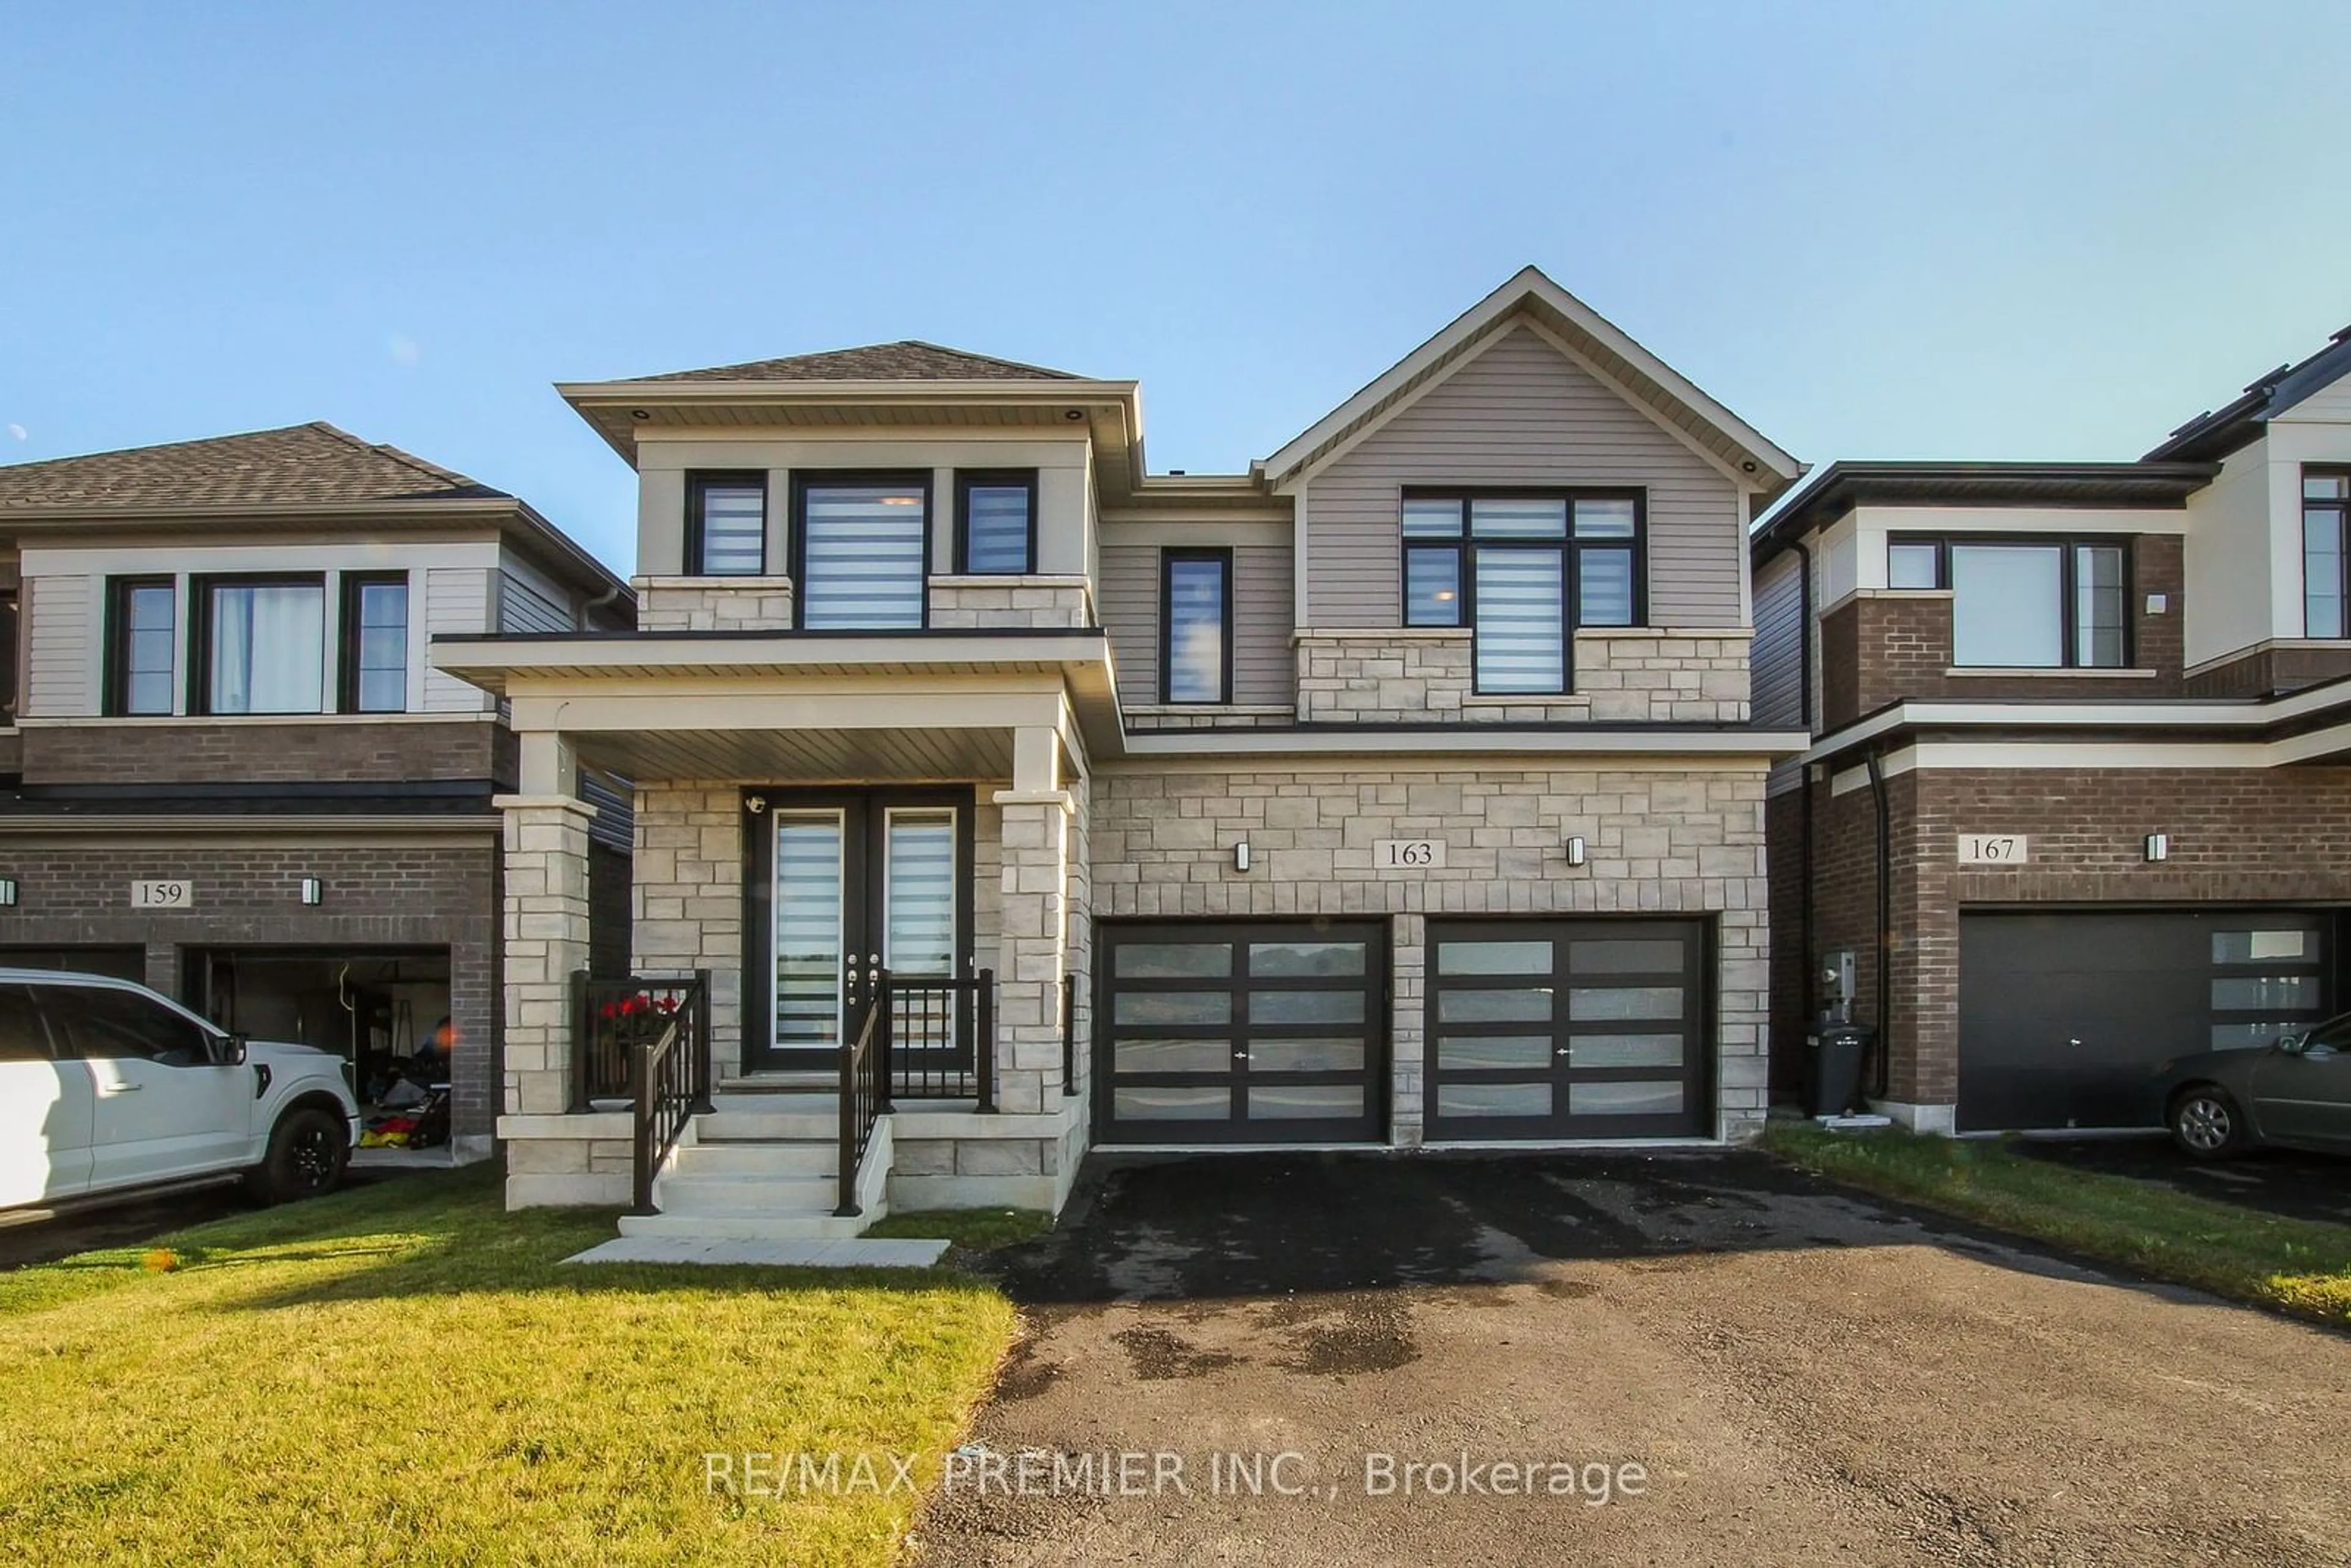 Home with brick exterior material for 163 Spitfire Dr, Hamilton Ontario L0R 1W0